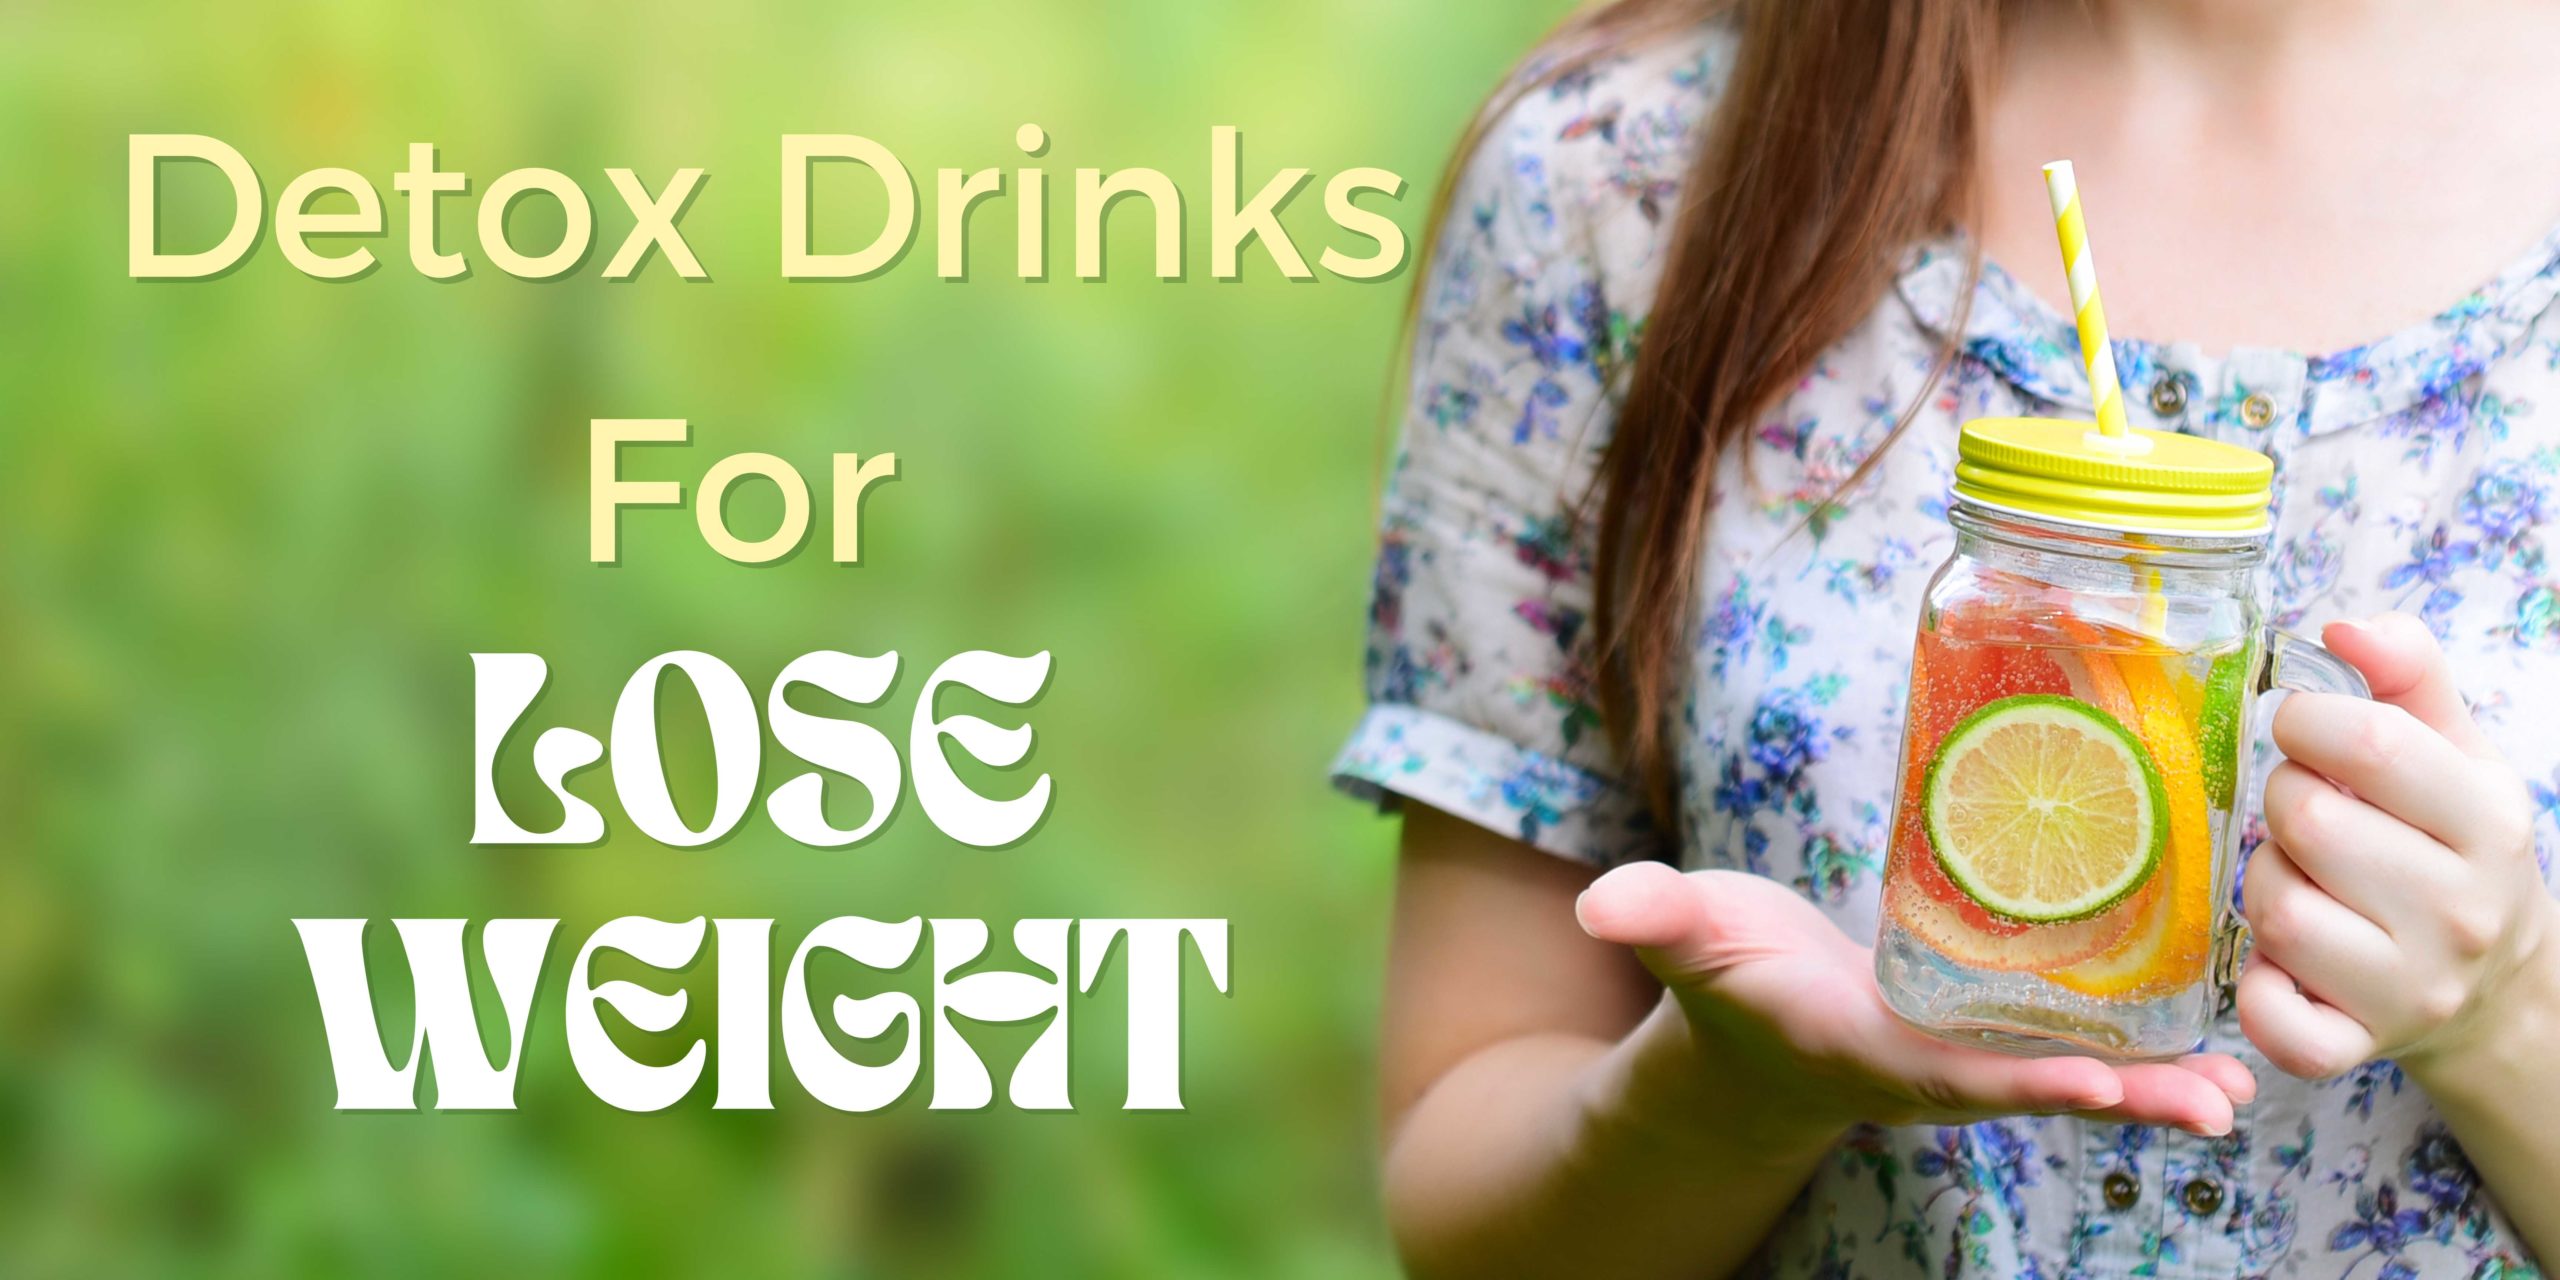 Trim That Tummy! Try These Amazing Detox drinks to lose weight